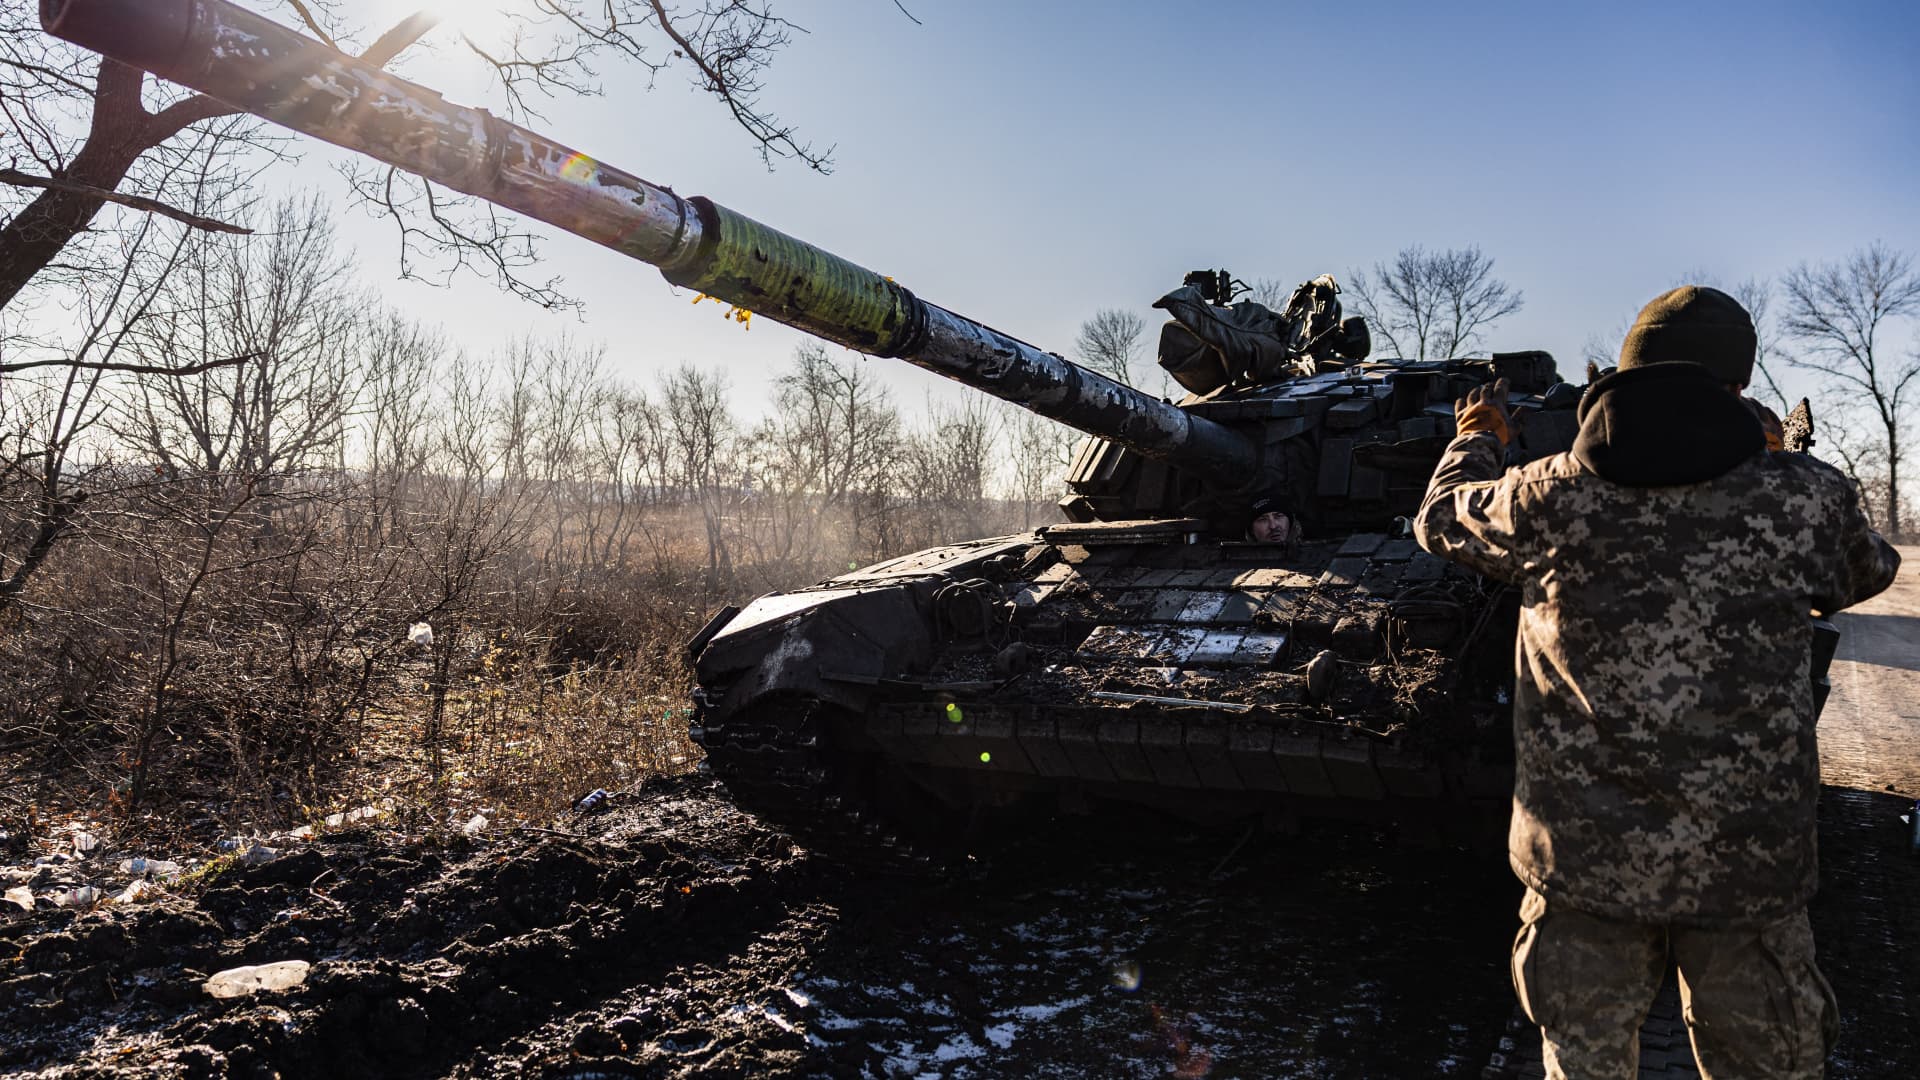 Soldiers from the Ukrainian armed forces' 10th brigade move a T-72 tank forward as they attempt to repair a track, in the Donetsk region, eastern Ukraine on December 19, 2022.